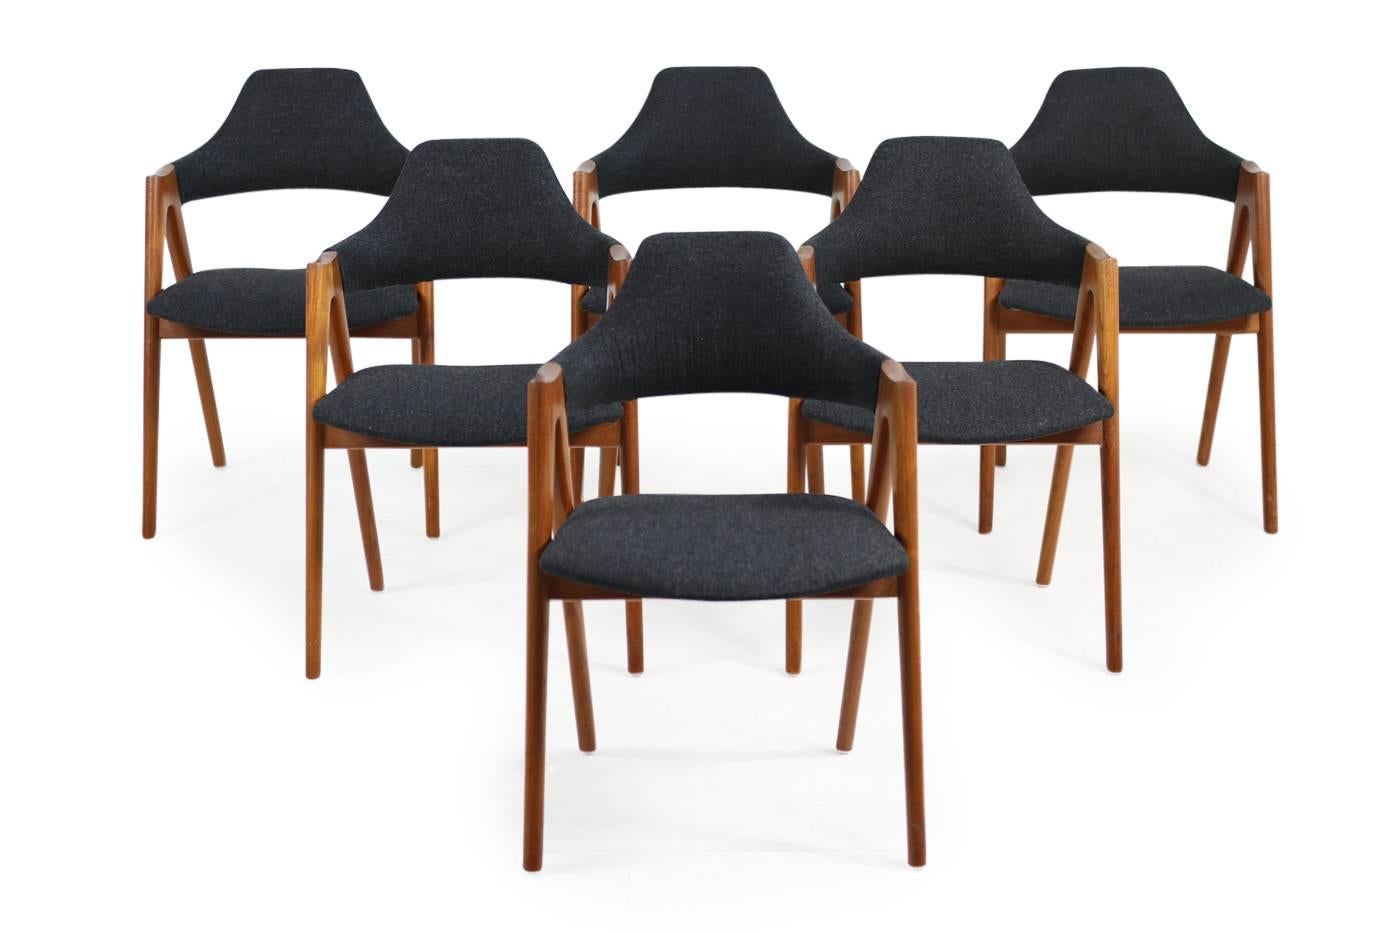 Beautiful set of six Kai Kristiansen 'Compass' dining chairs, solid teak wood, new upholstery and covered with new dark grey wool fabric, best condition, 1960s made in Denmark, Danish modern design.
    